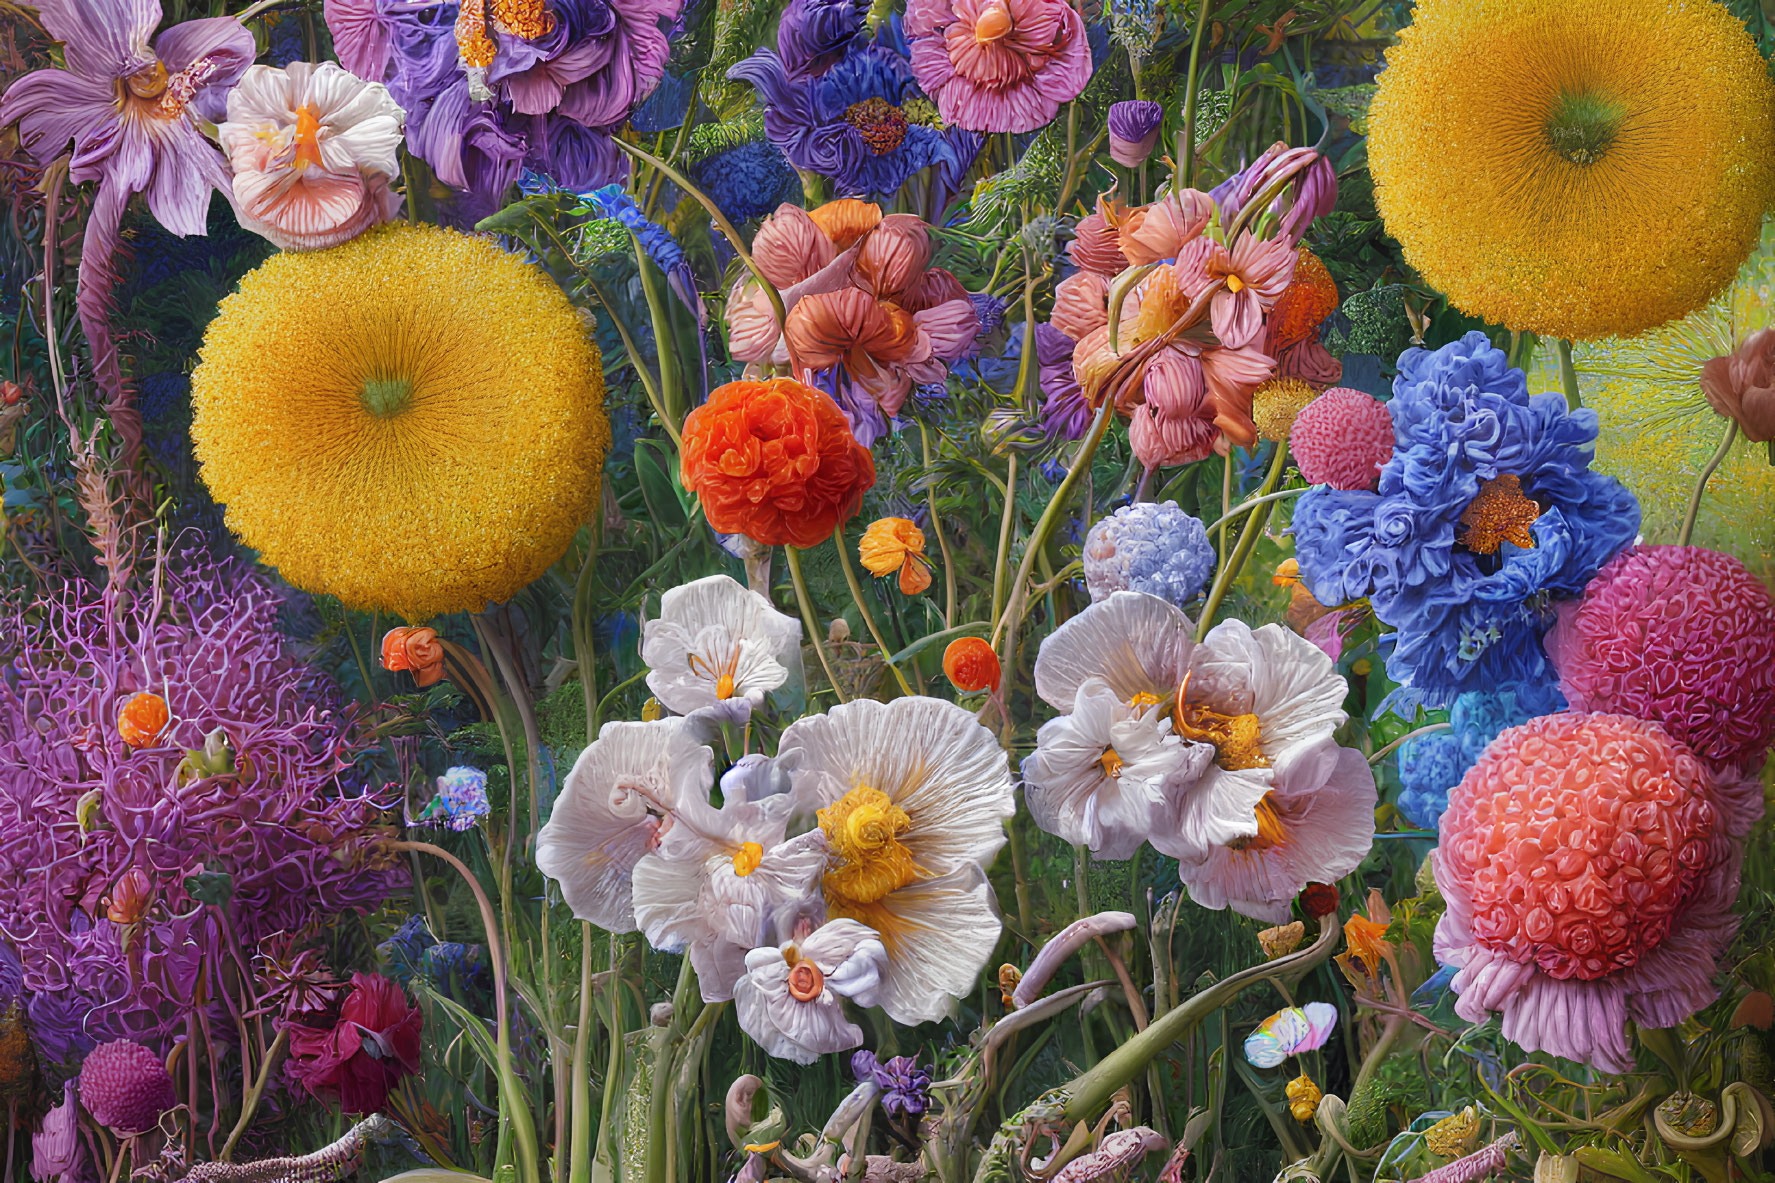 Colorful Array of Vibrant Flowers in Rich Textures and Hues